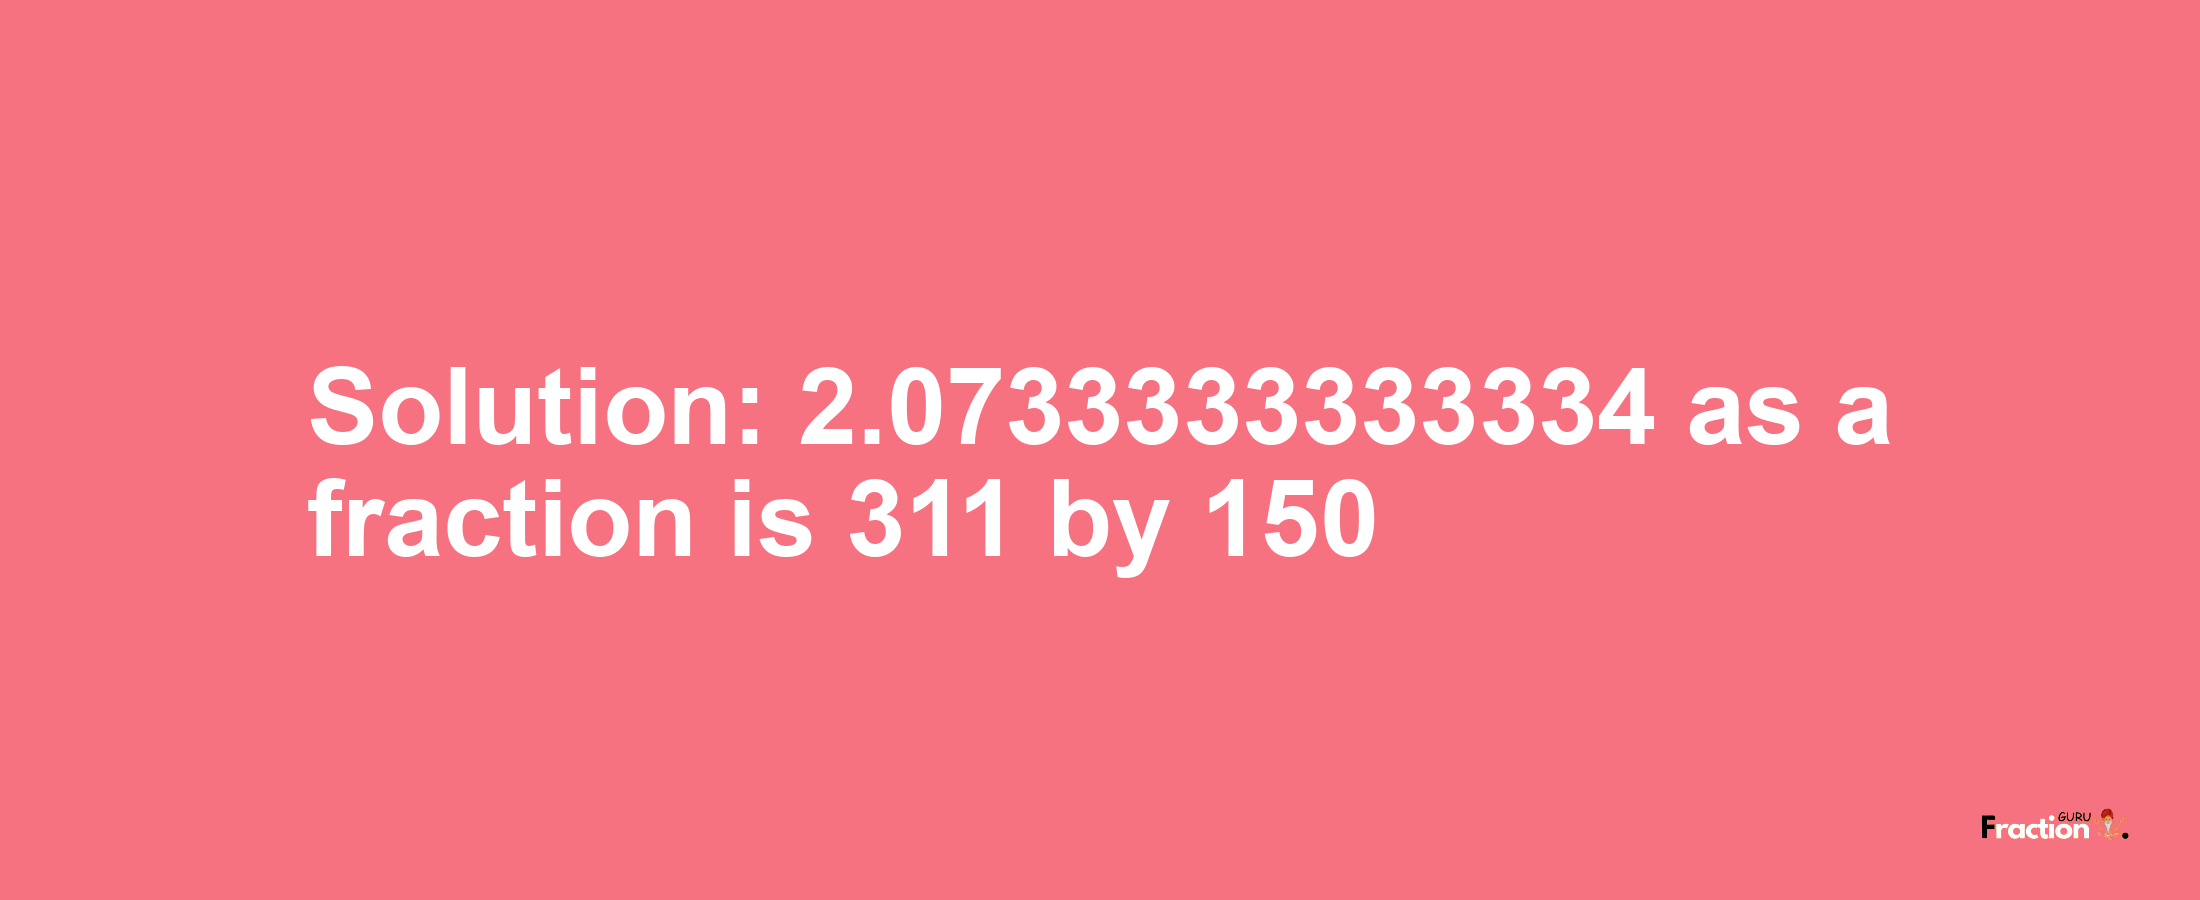 Solution:2.0733333333334 as a fraction is 311/150